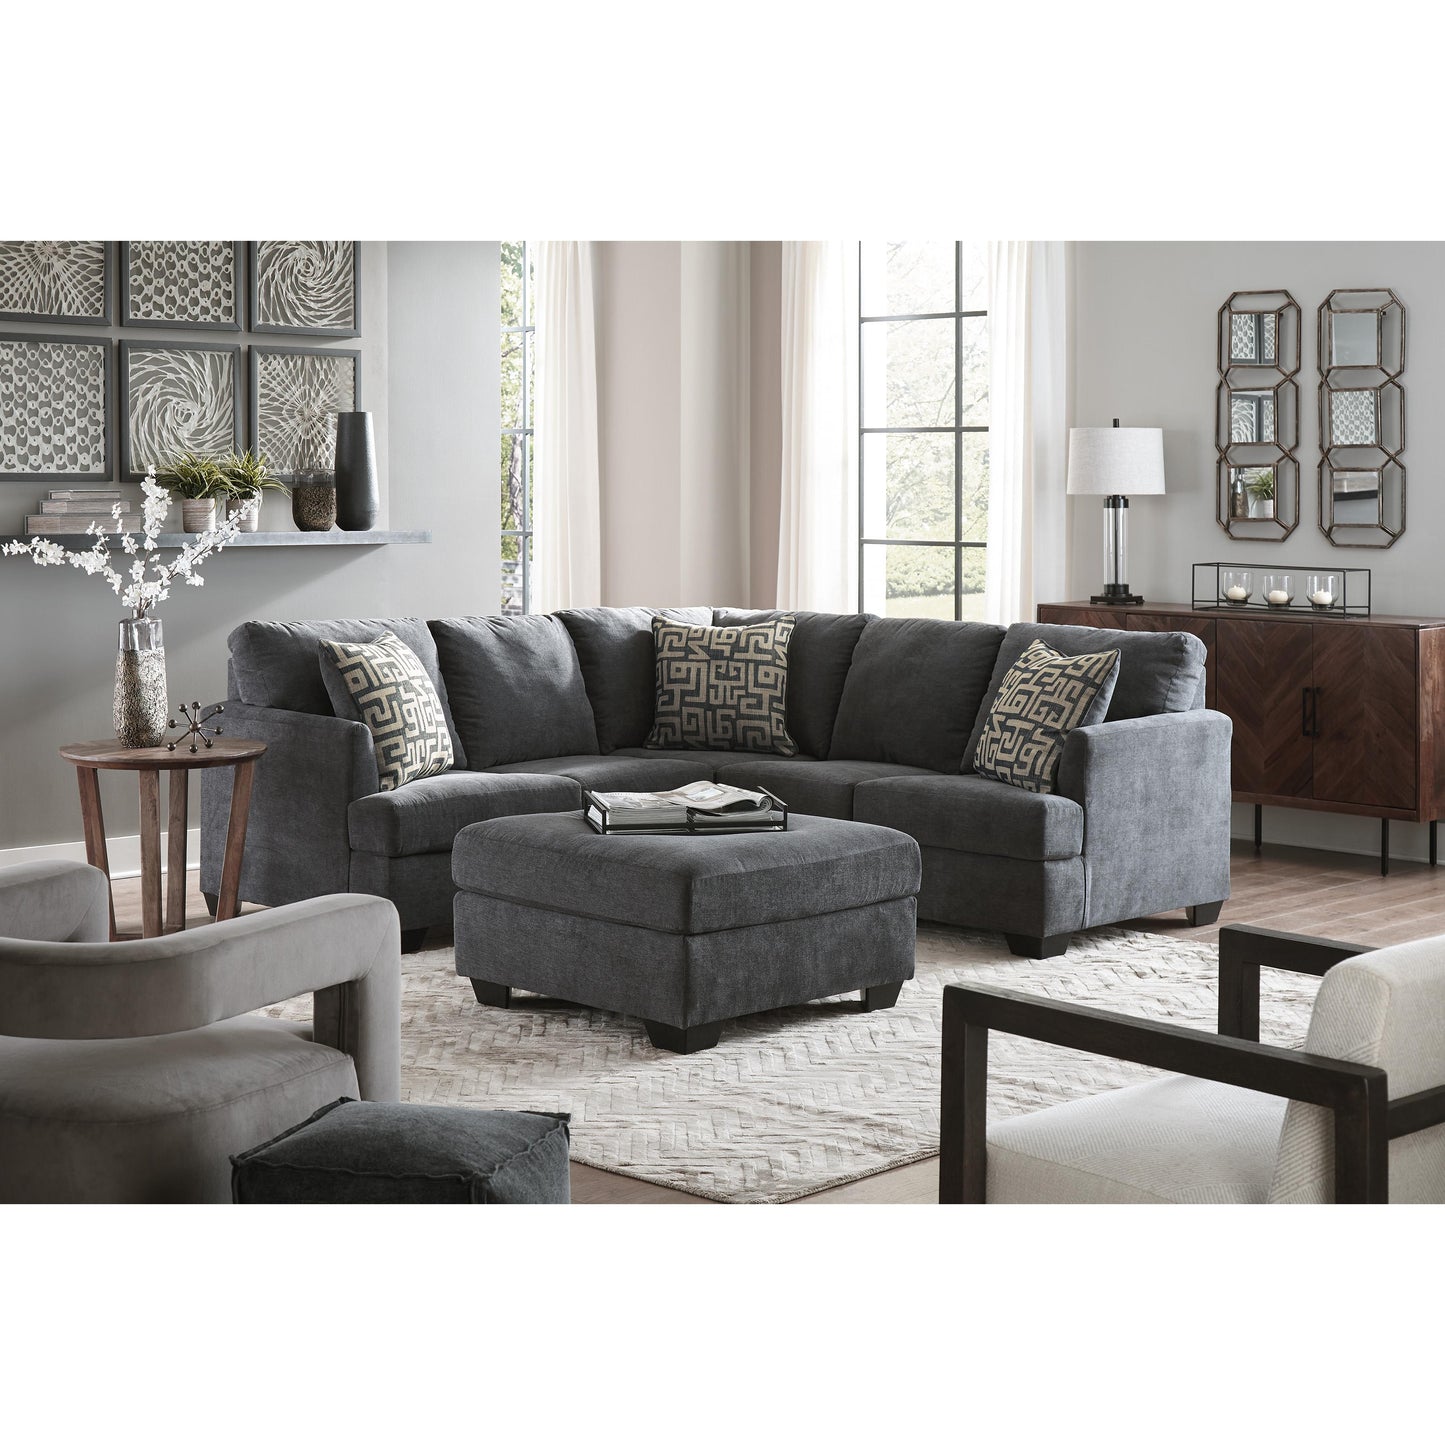 Signature Design by Ashley Ambrielle 2 pc Sectional 1190255/1190249 IMAGE 3